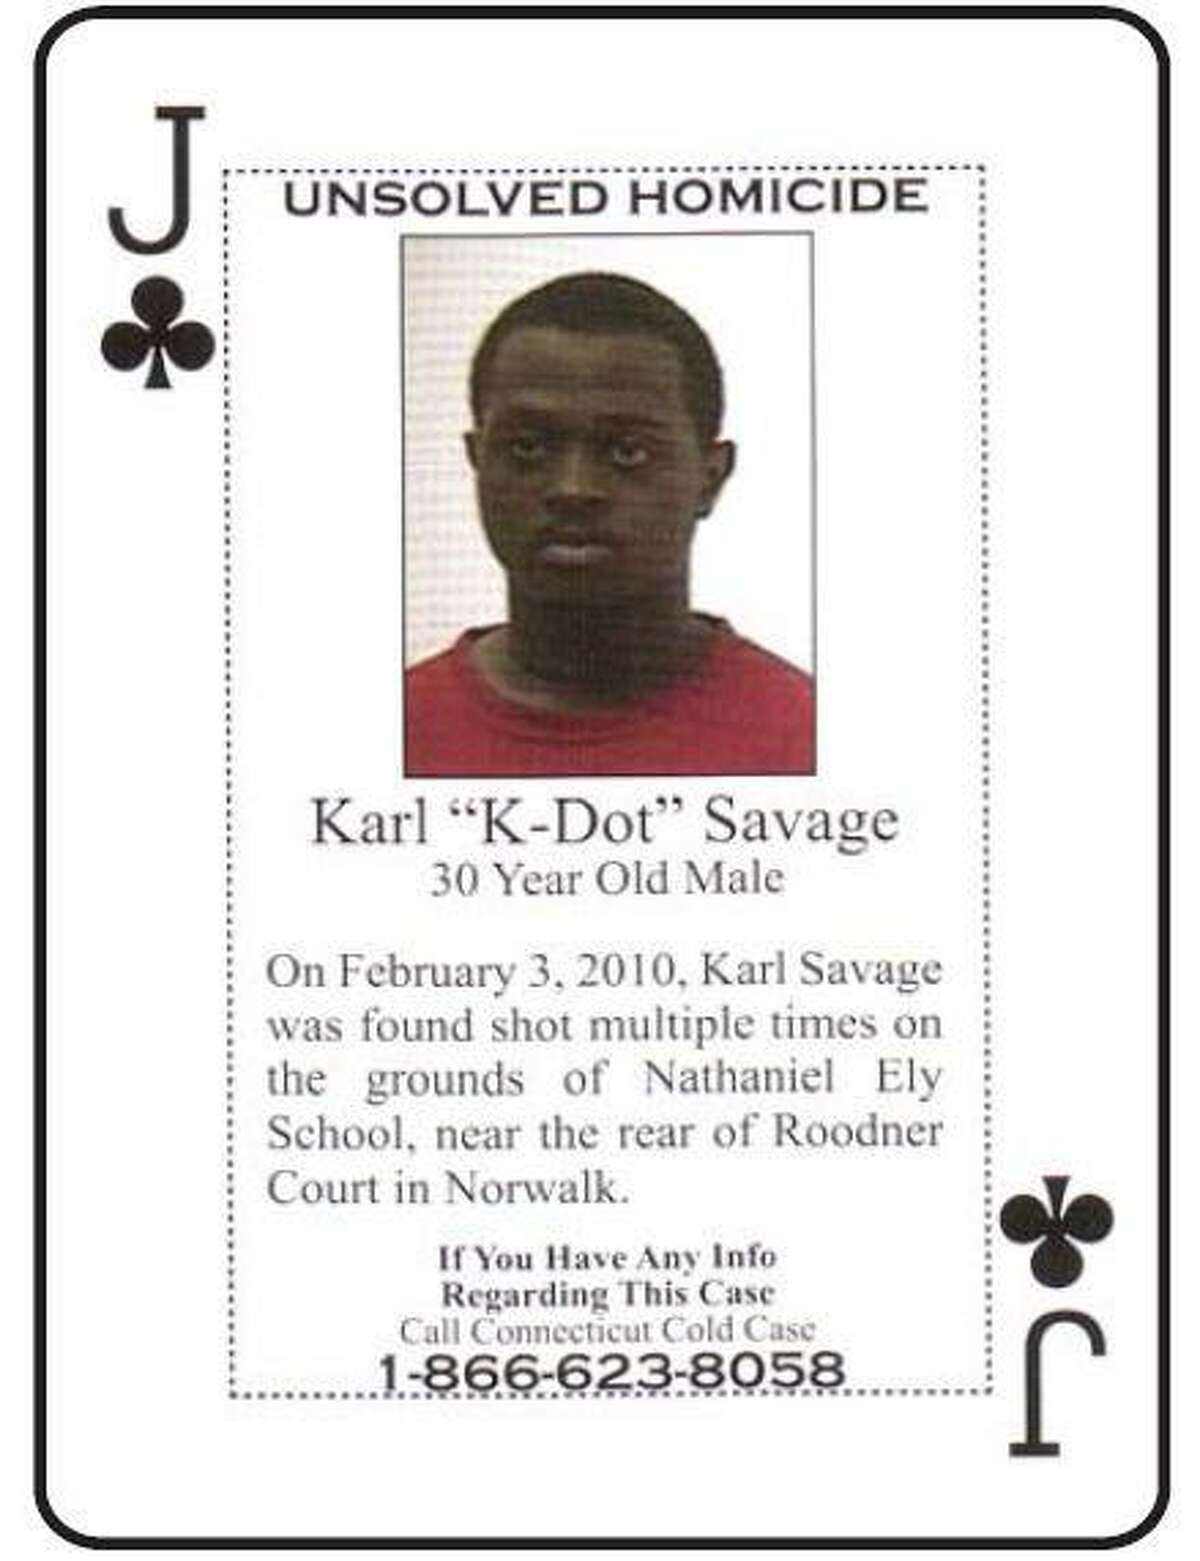 Karl “K-Dot” Savage, 30, died on Feb. 3, 2010 of multiple gunshot wounds. His body was found on the grounds of Nathaniel Ely School, near the rear of Roodner Court Housing Complex.